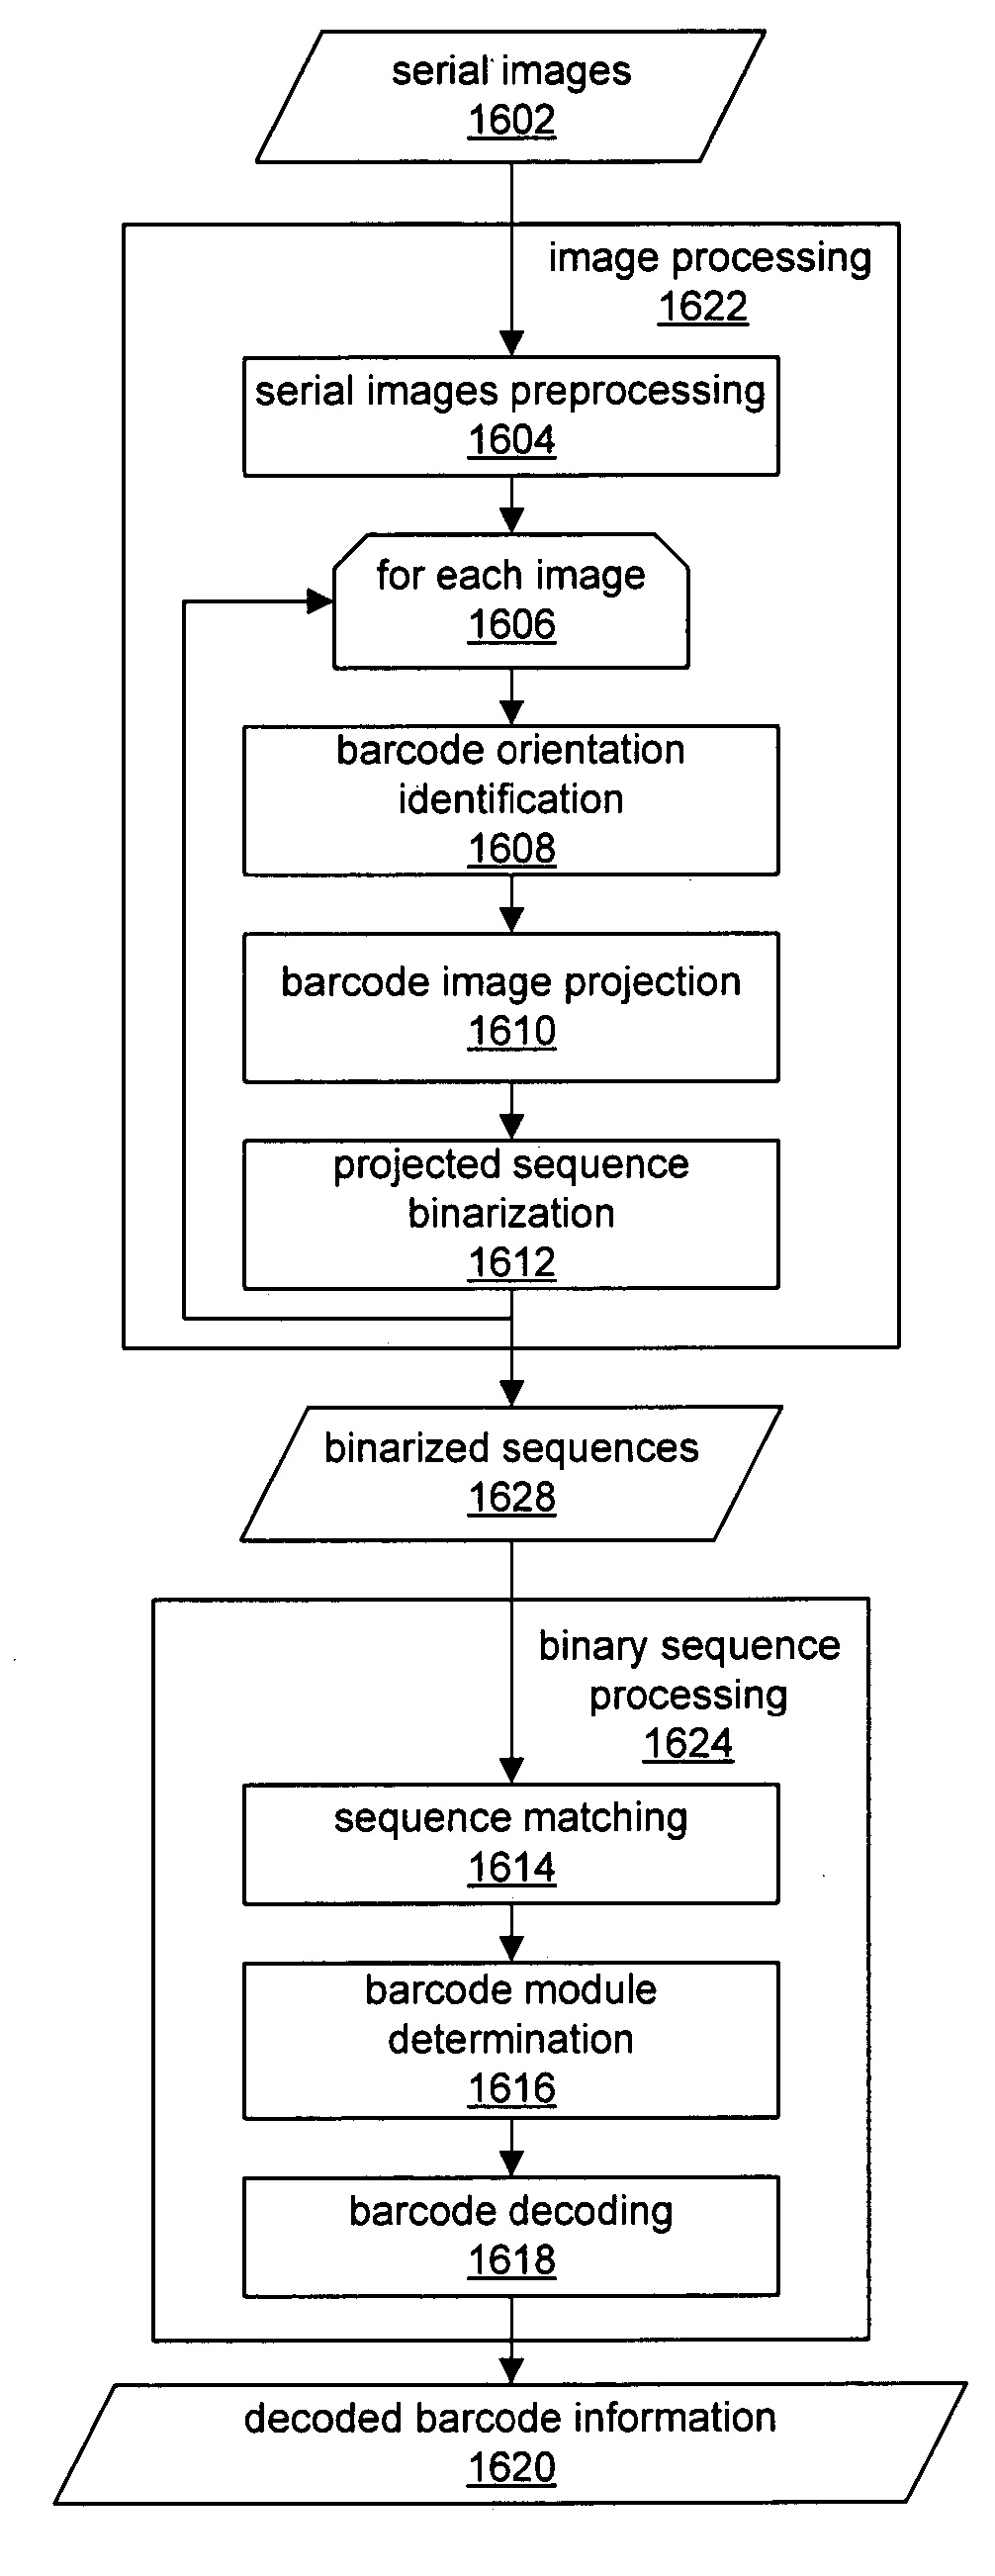 Camera-based barcode recognition